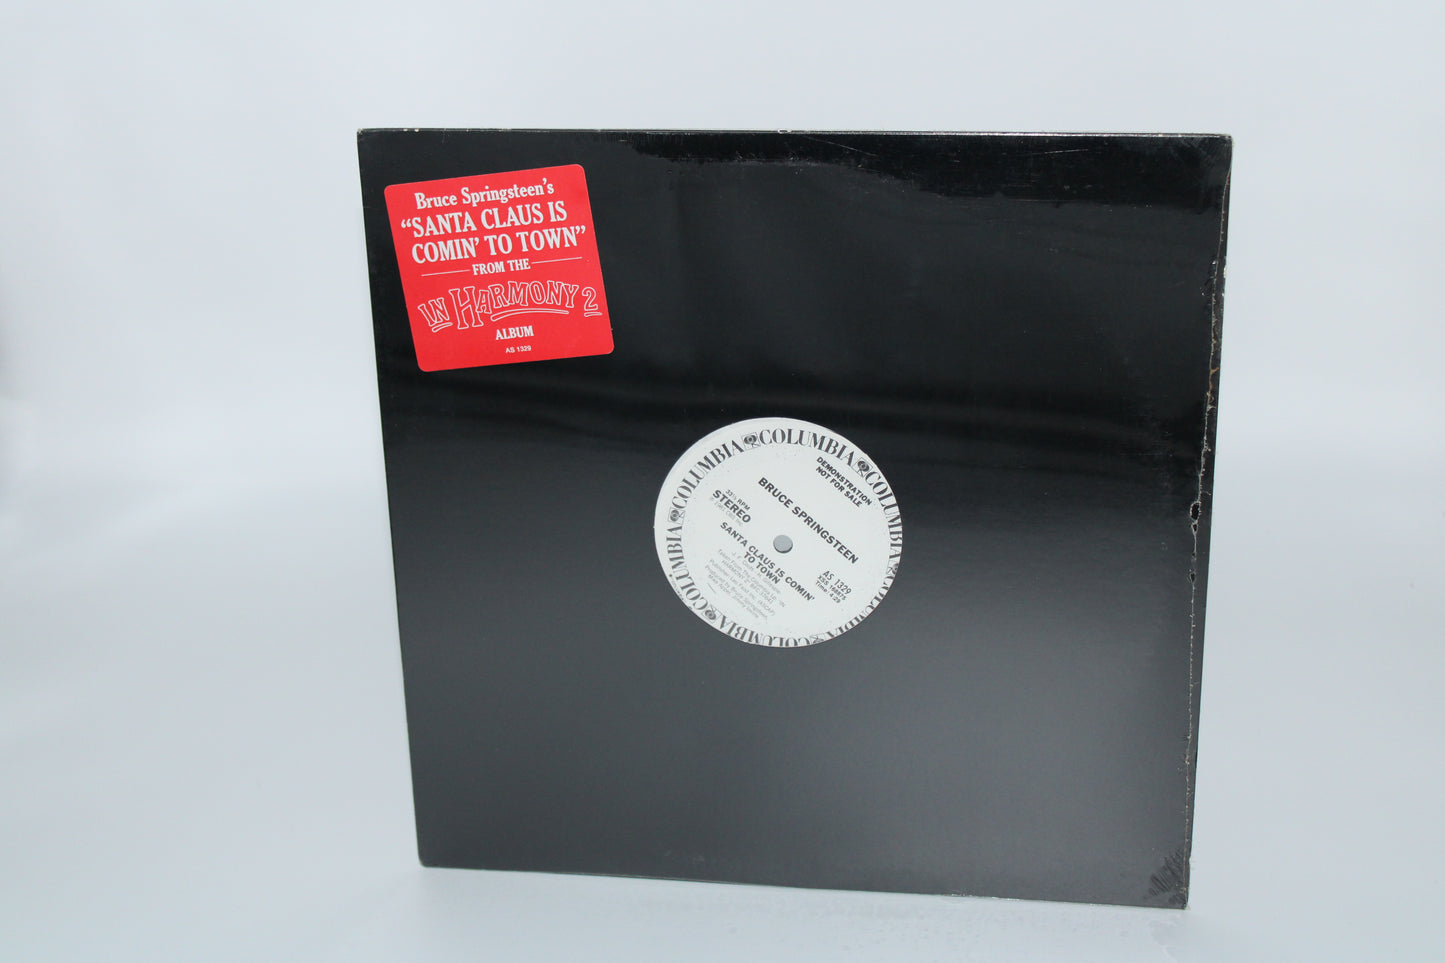 Bruce Springsteen Santa Claus is Comin’ to Town – 12” White Label Promo - Sealed Collectible